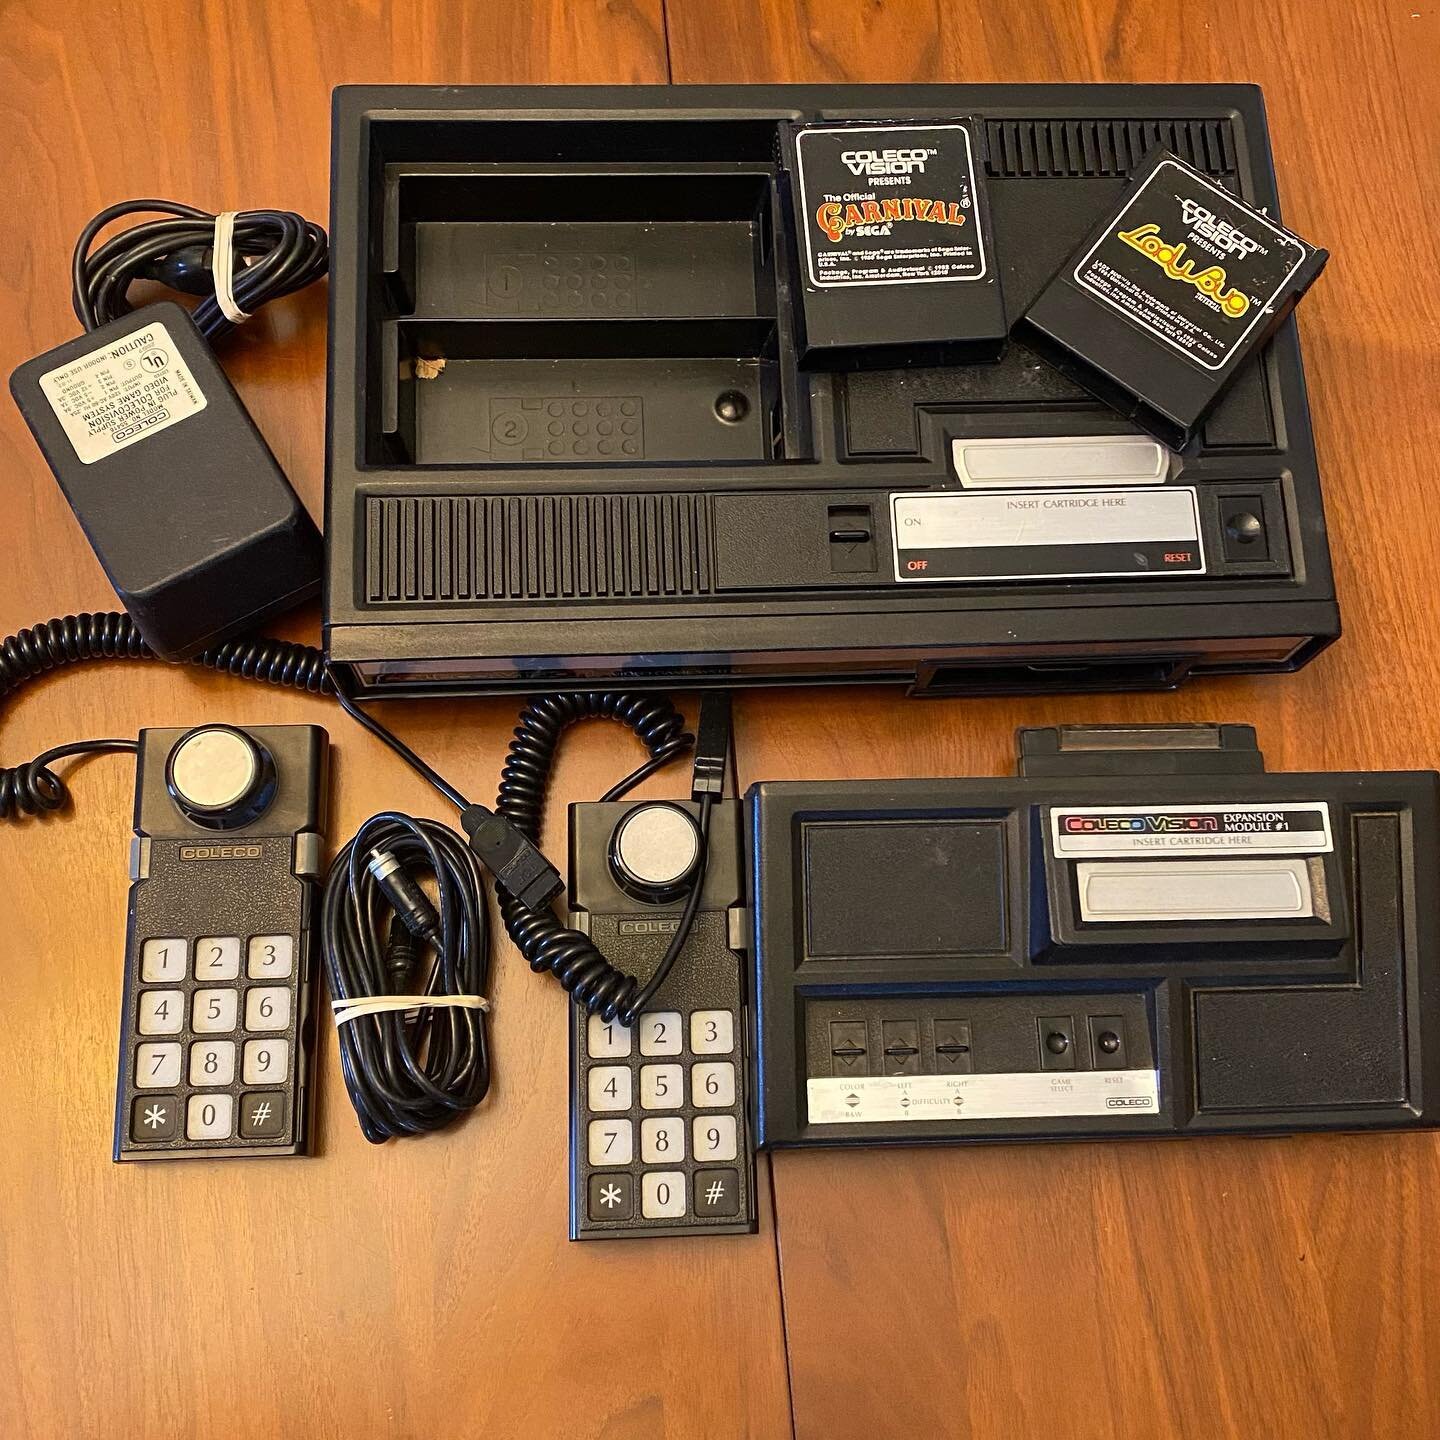 New this week to the archive collection a Colecovision (1983) this one is complete with the Expansion Module 1 allows the ColecoVision to play any Atari 2600 game. This one is very dirty and will need a good cleaning.
If you&rsquo;d like to help us b